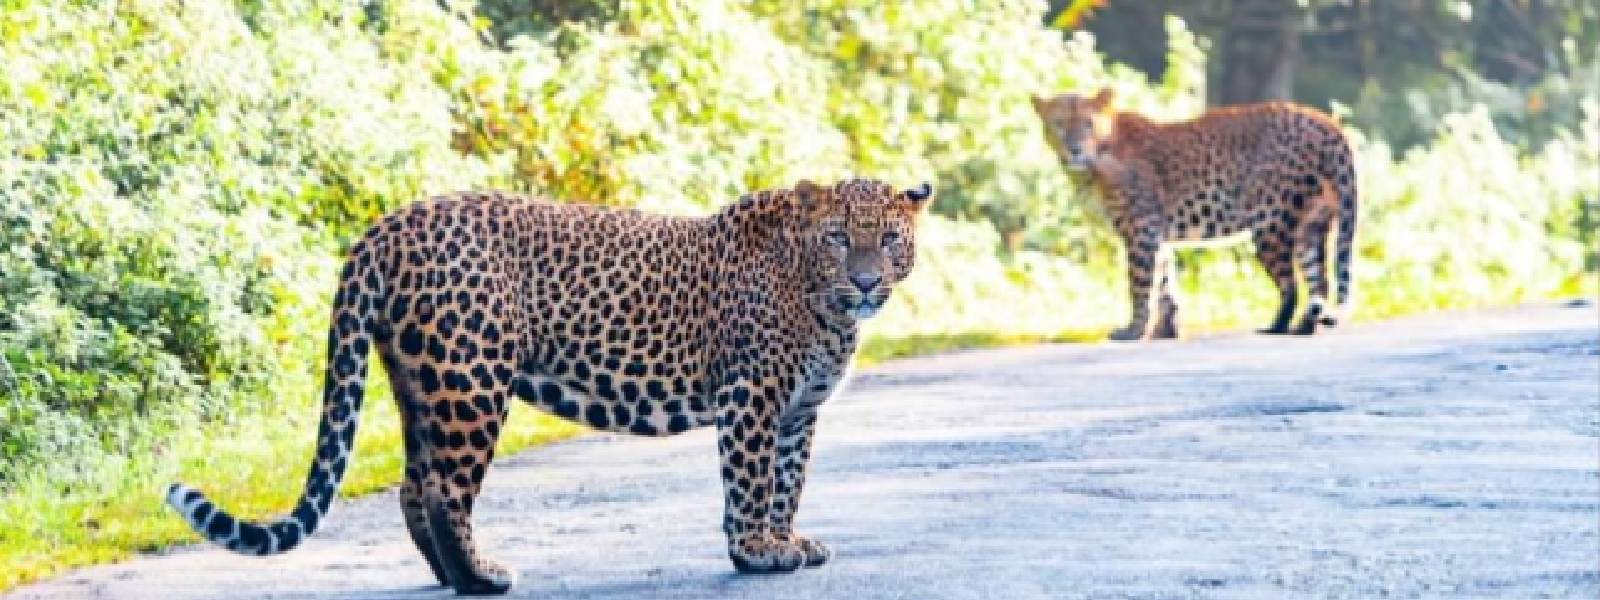 Photographed Horton Plains leopards not a threat, Visitor not allowed to enter said area